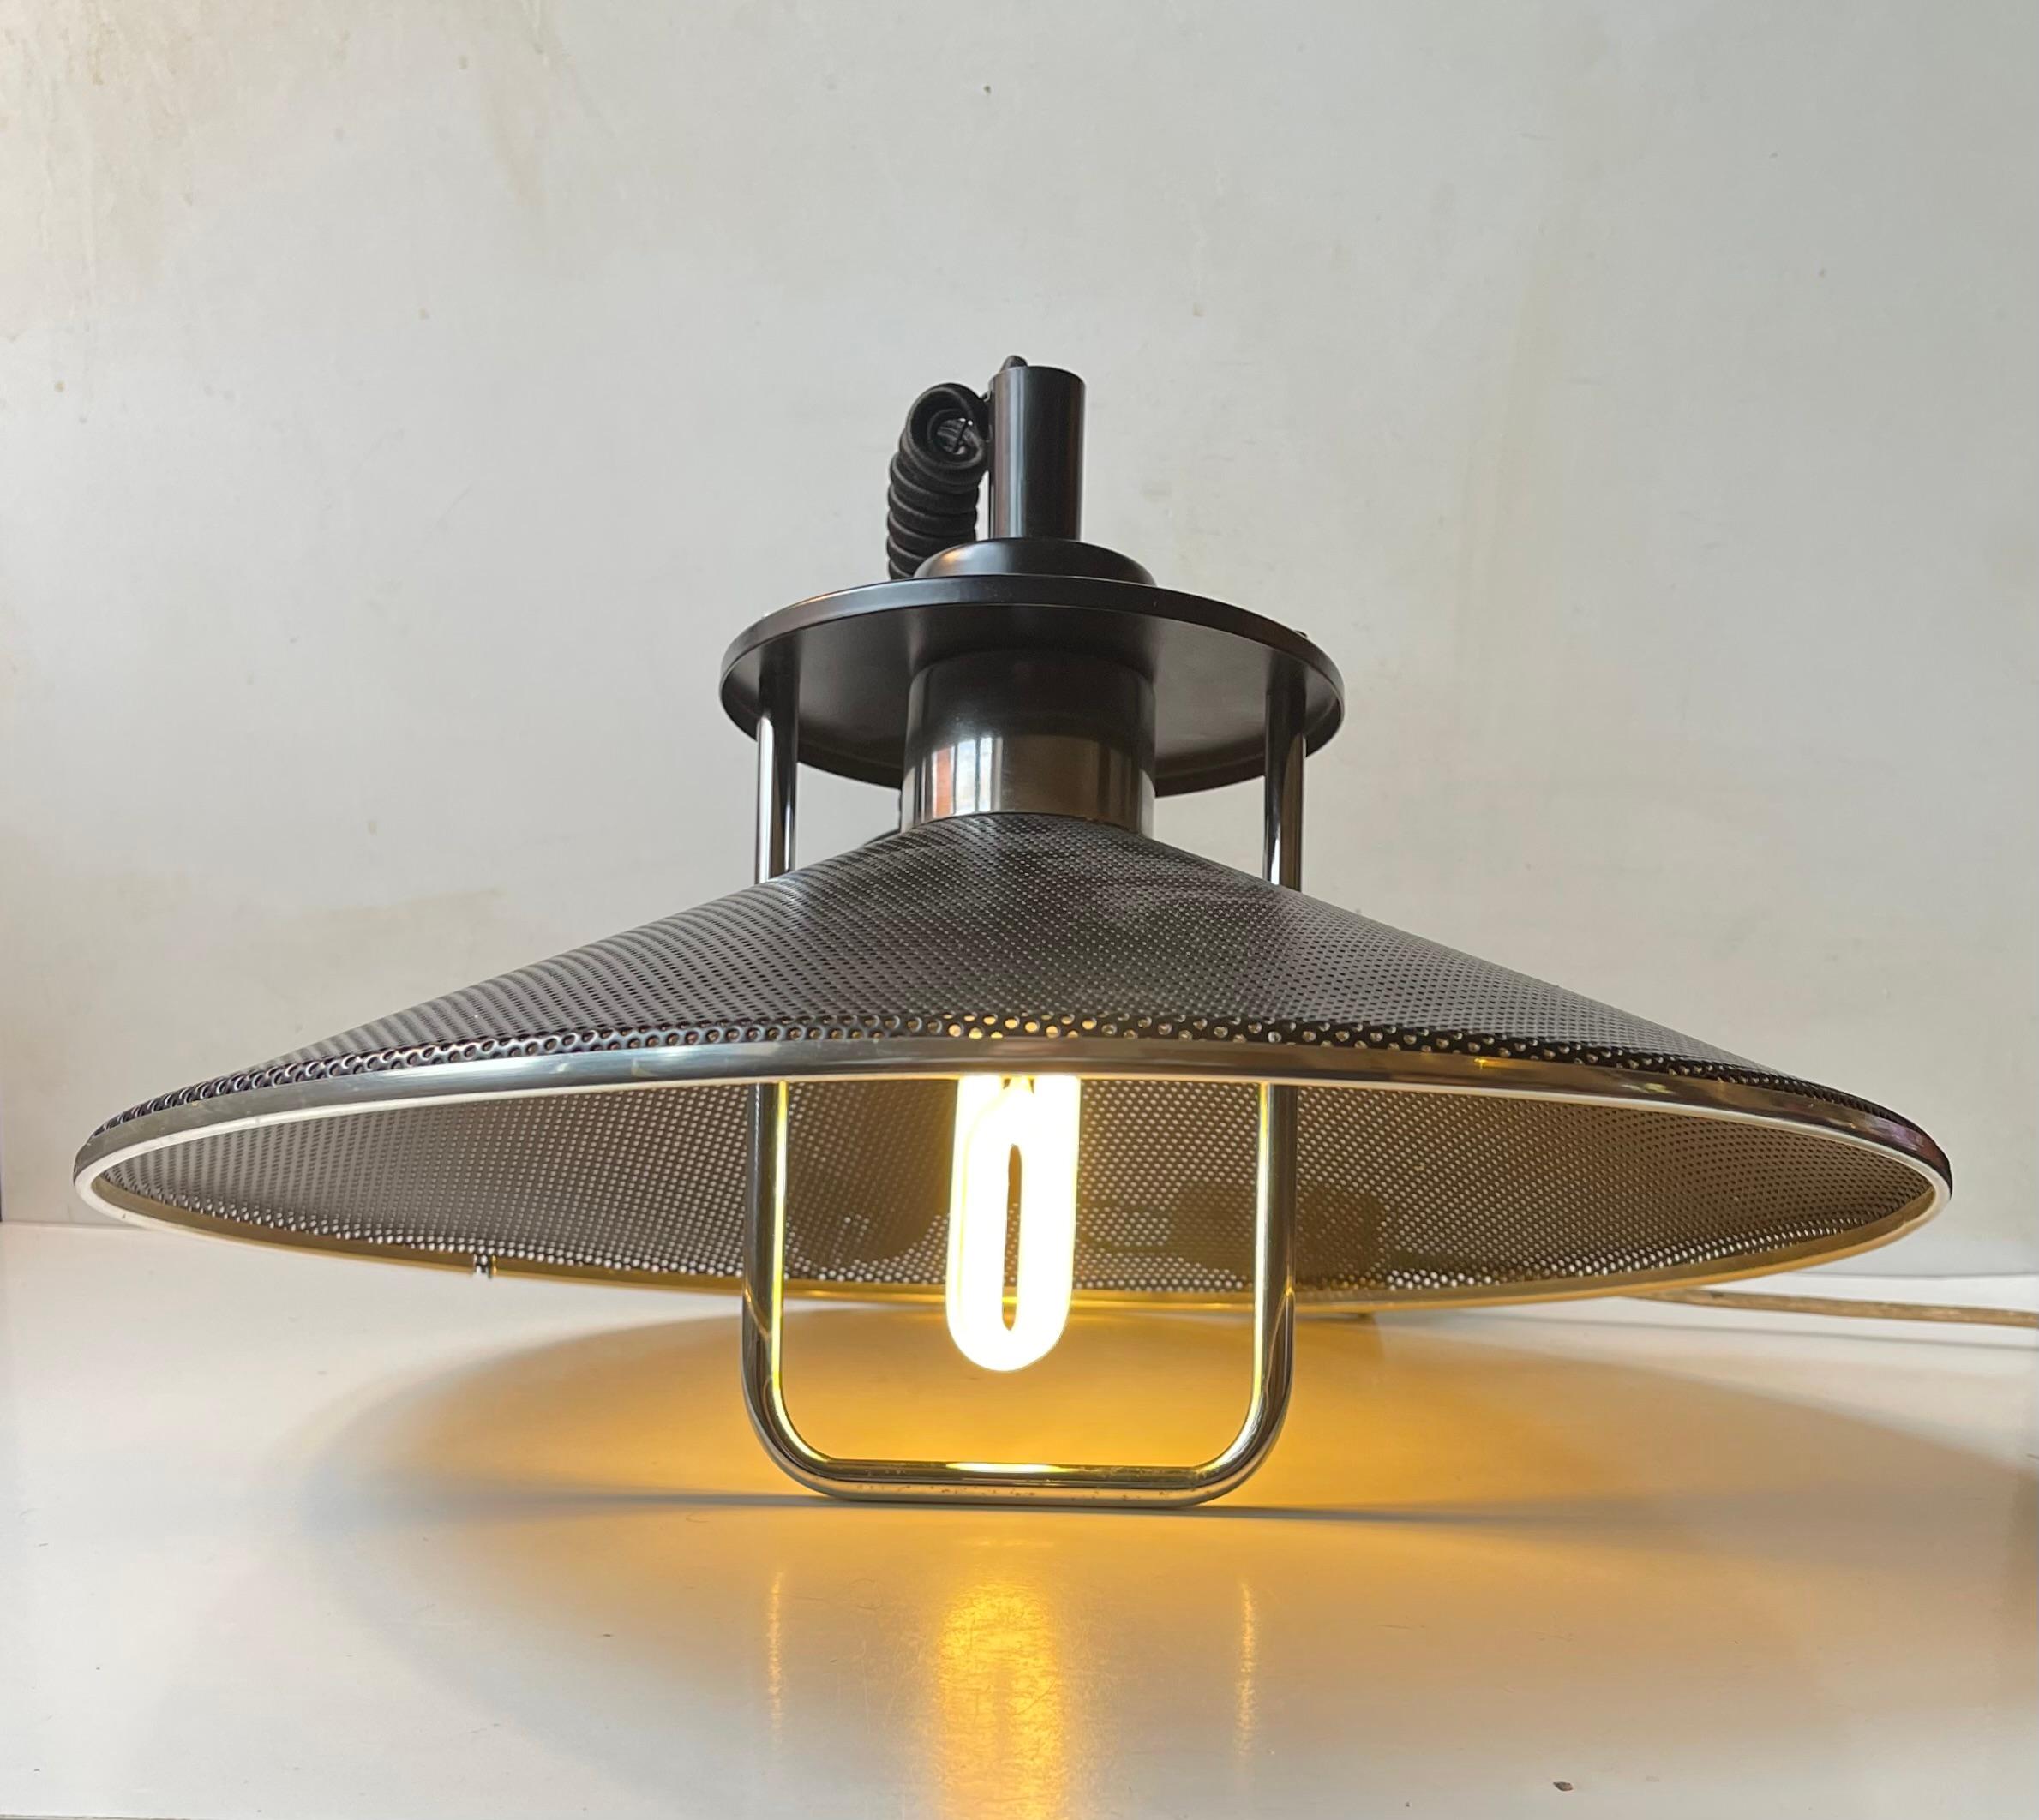 A stylish height adjustable vintage Danish hanging Lamp. In Denmark used over an architects, artist or studio work-space due to its versatility. The light is in a very nice vintage condition with light ware. It features an Italian suspension system,